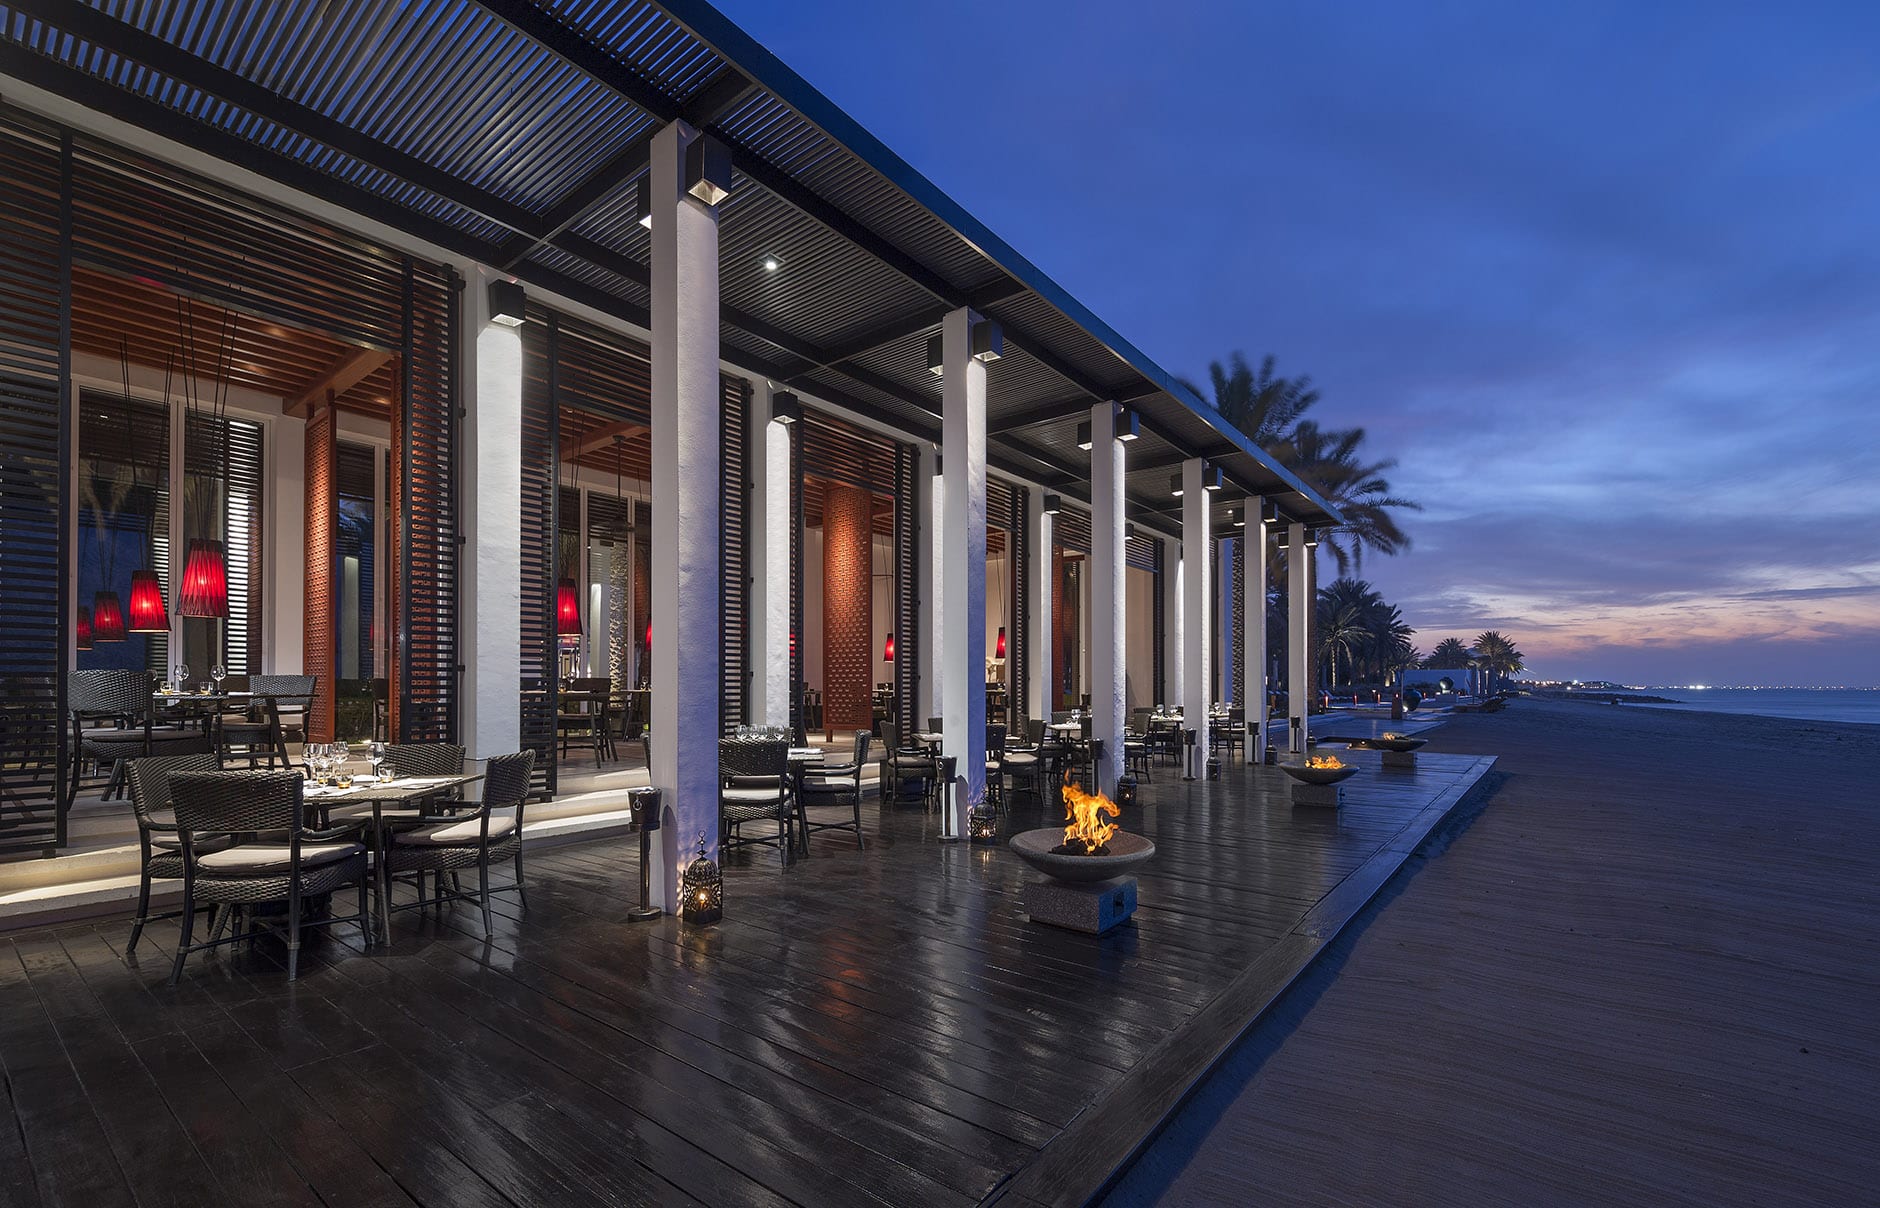 The Chedi Muscat, Oman. Hotel Review by TravelPlusStyle. Photo © GHM Hotels